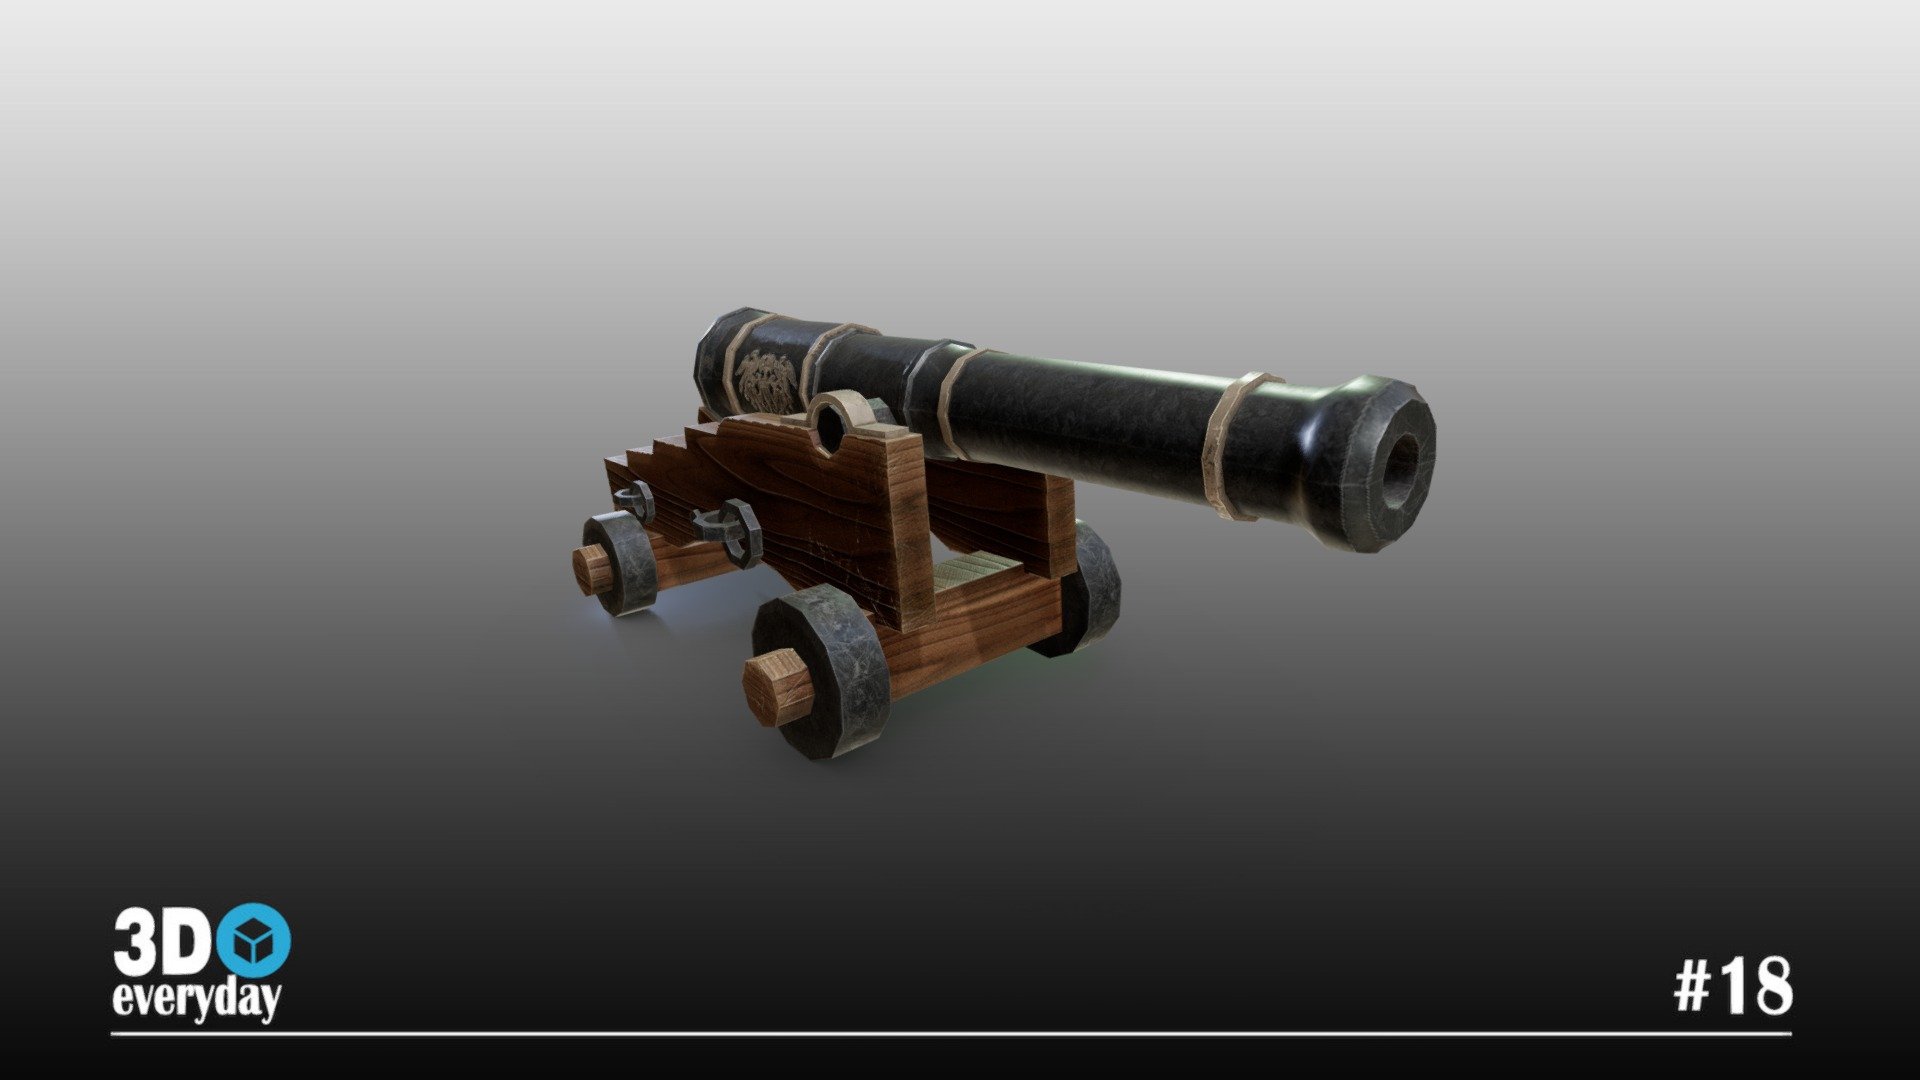 A lowpoly cannon I've made for a ship that I'm doing. Modeled in Blender, textured in Substance 3d model